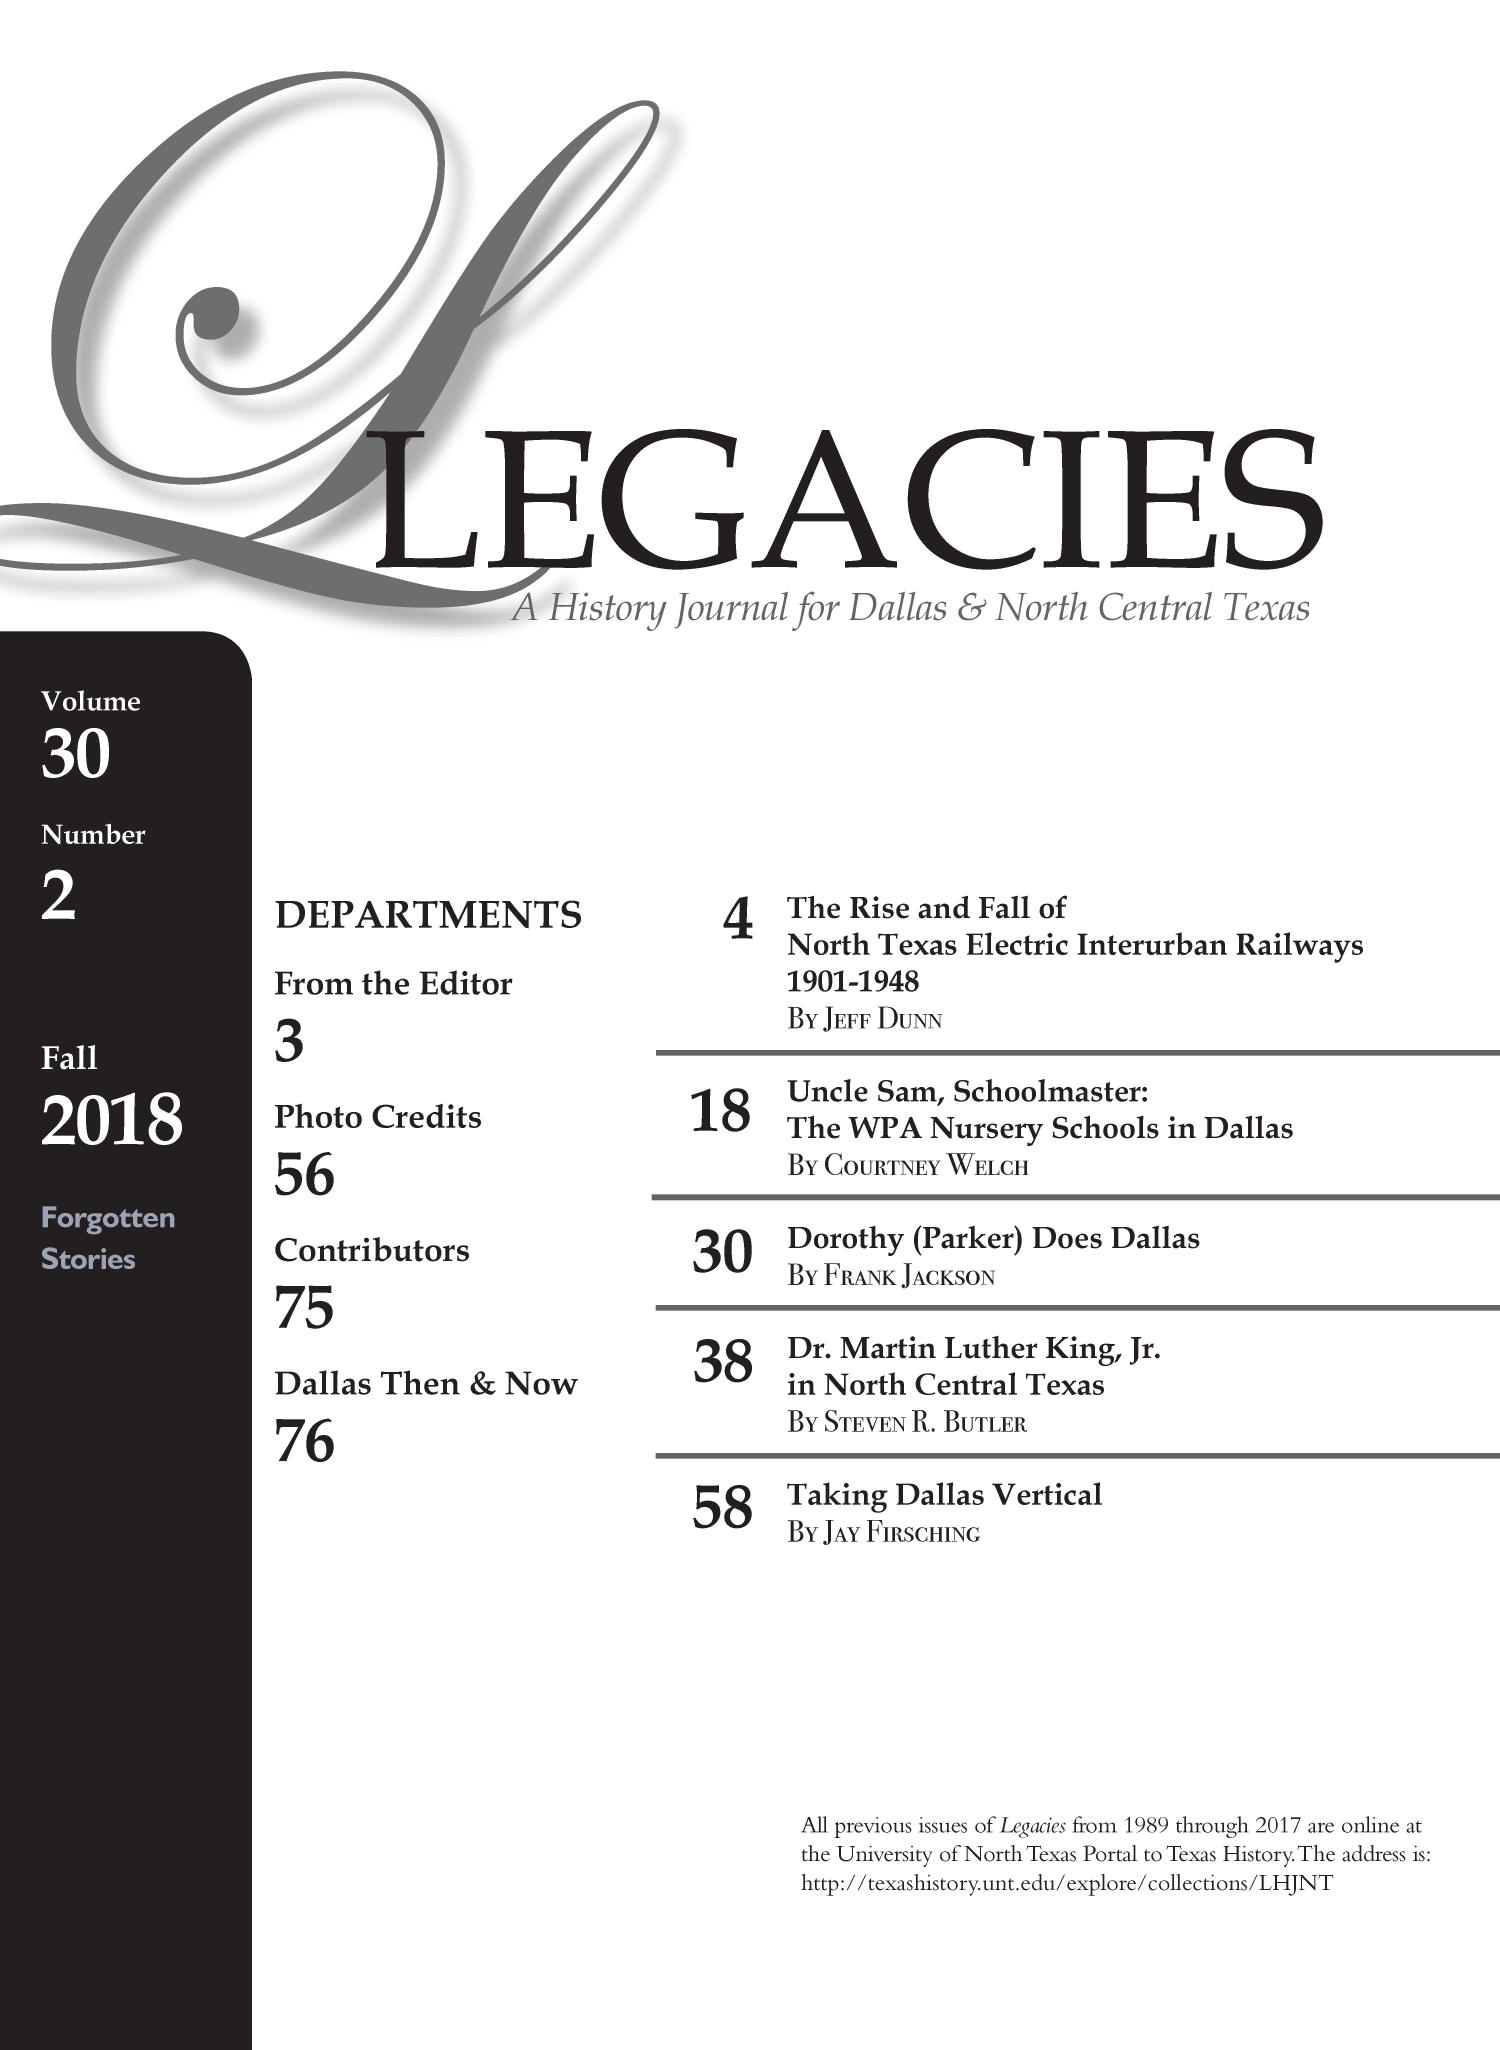 Legacies: A History Journal for Dallas and North Central Texas, Volume 30, Number 2, Fall 2018
                                                
                                                    Title Page
                                                